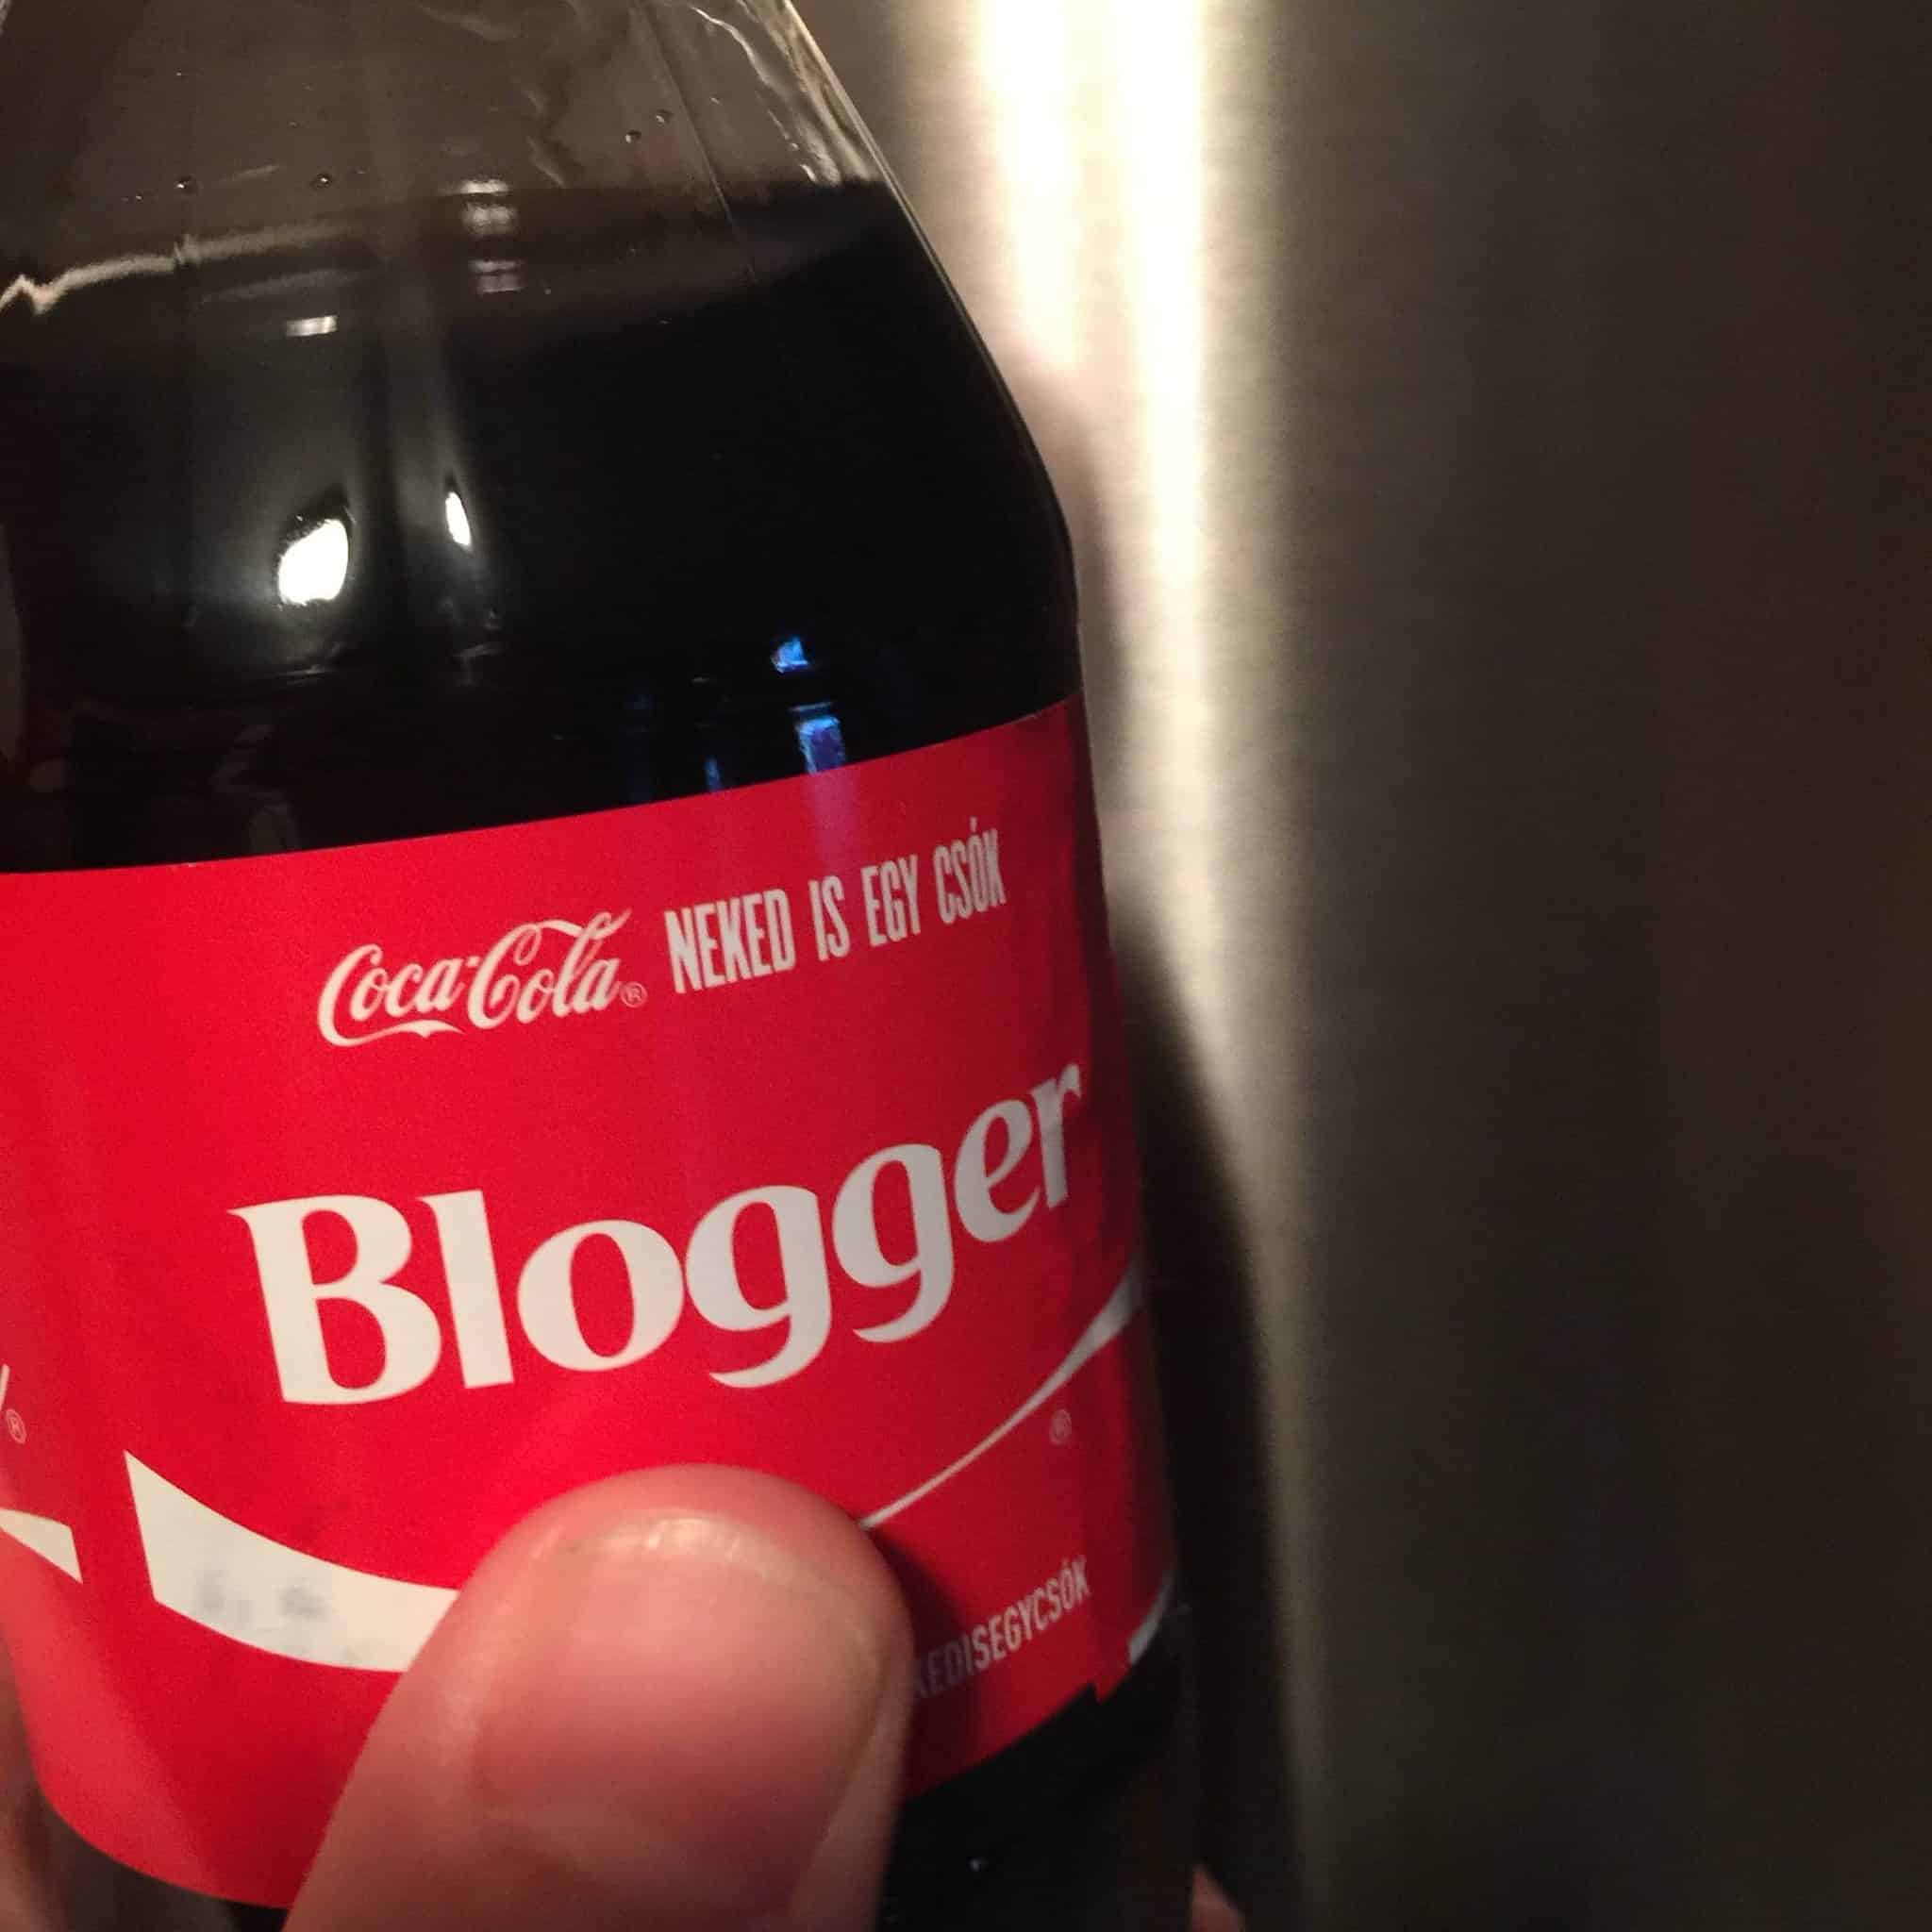 Share a Coke with a Blogger?